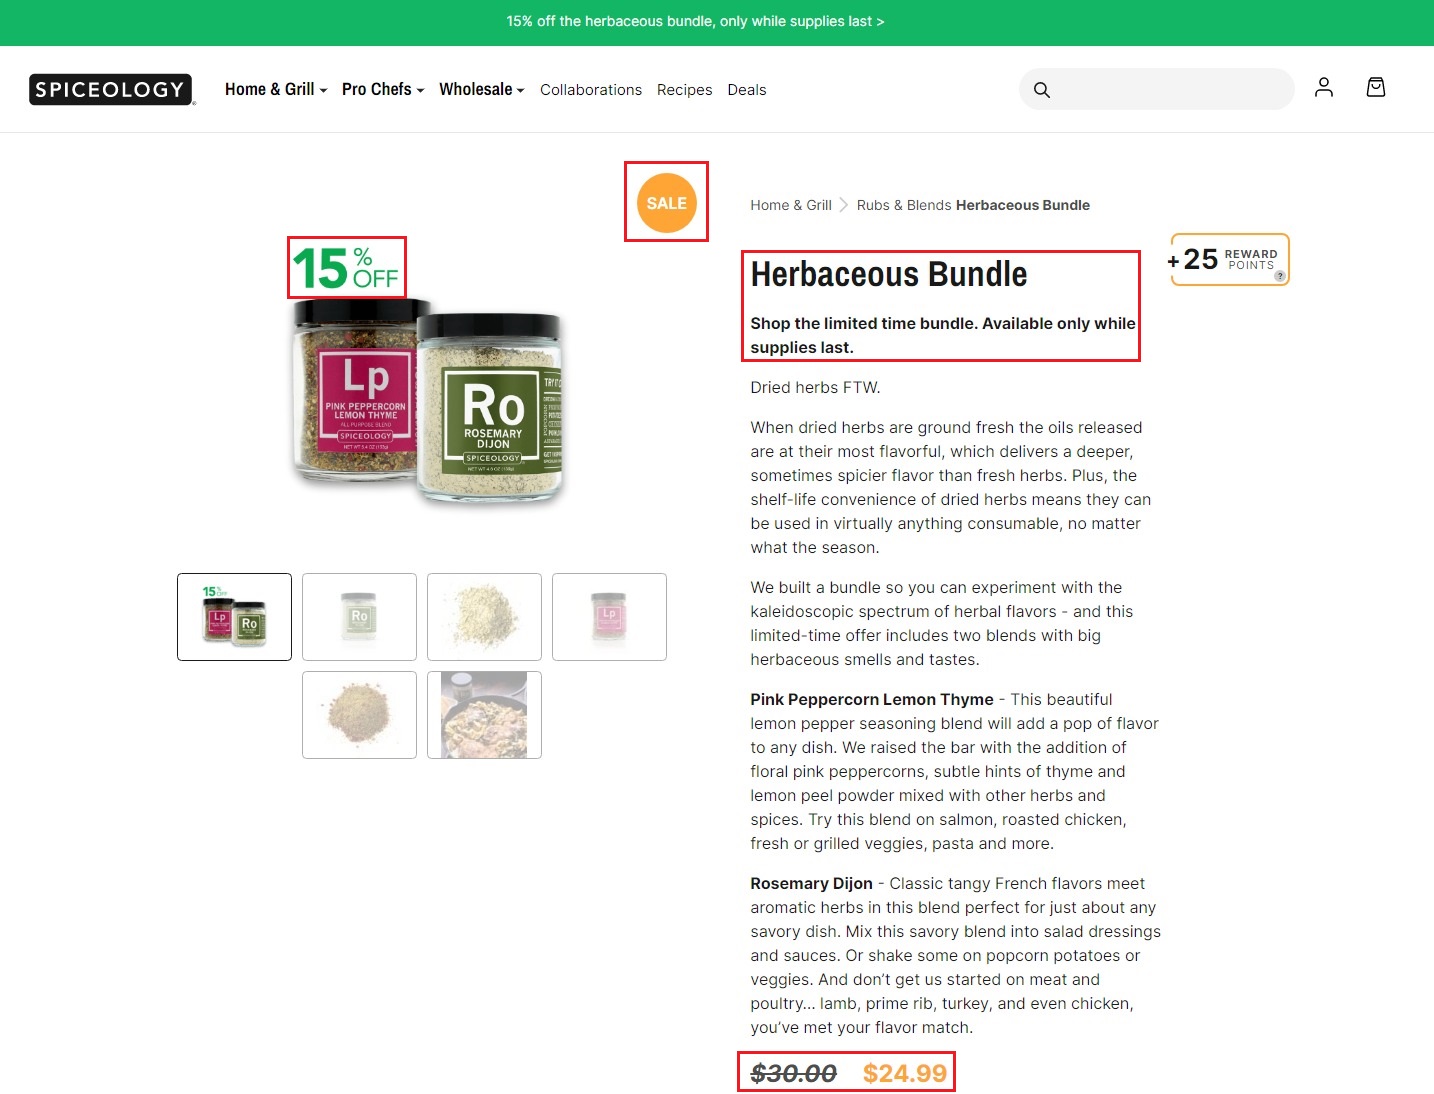 Screenshot of Spiceology's website, showing the "Herbaceous Bundle" deal